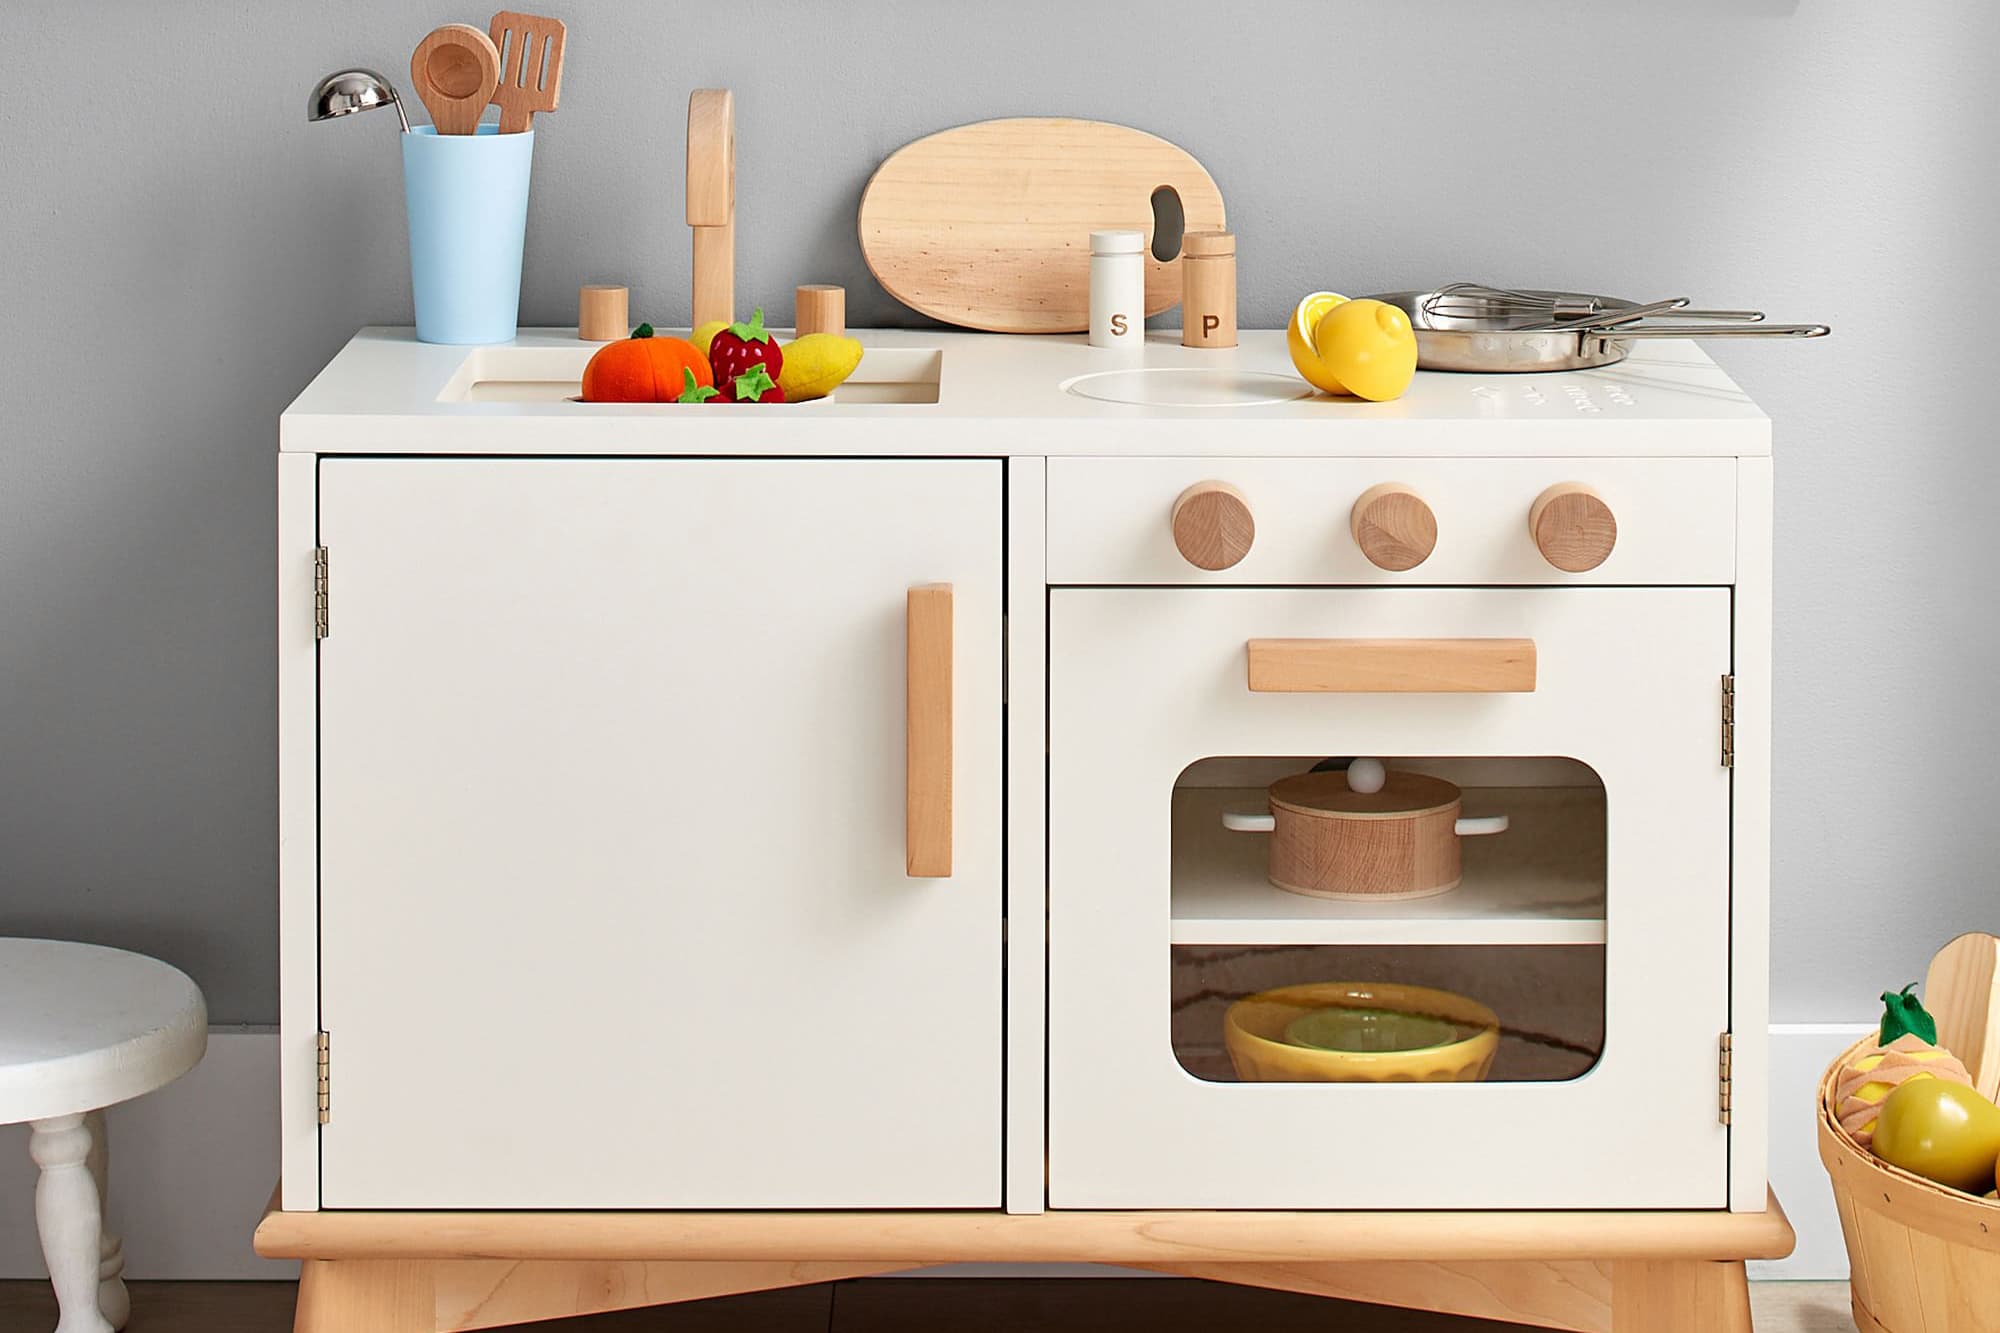 The 10 Best Kitchen Sets for Kids of 2023